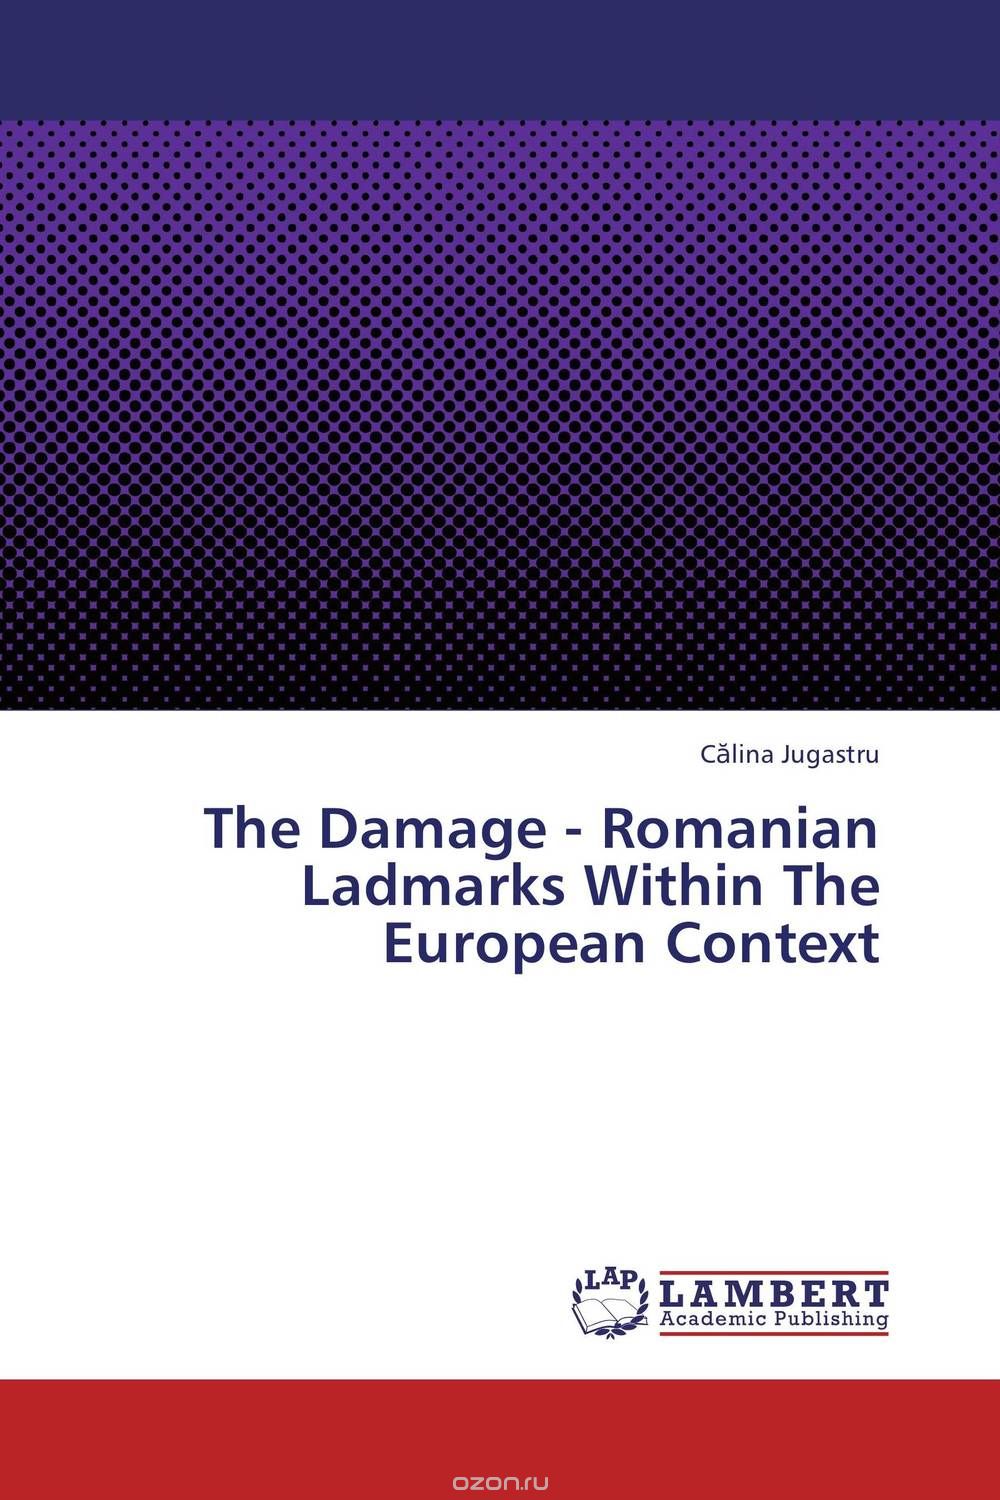 The Damage - Romanian Ladmarks Within The European Context